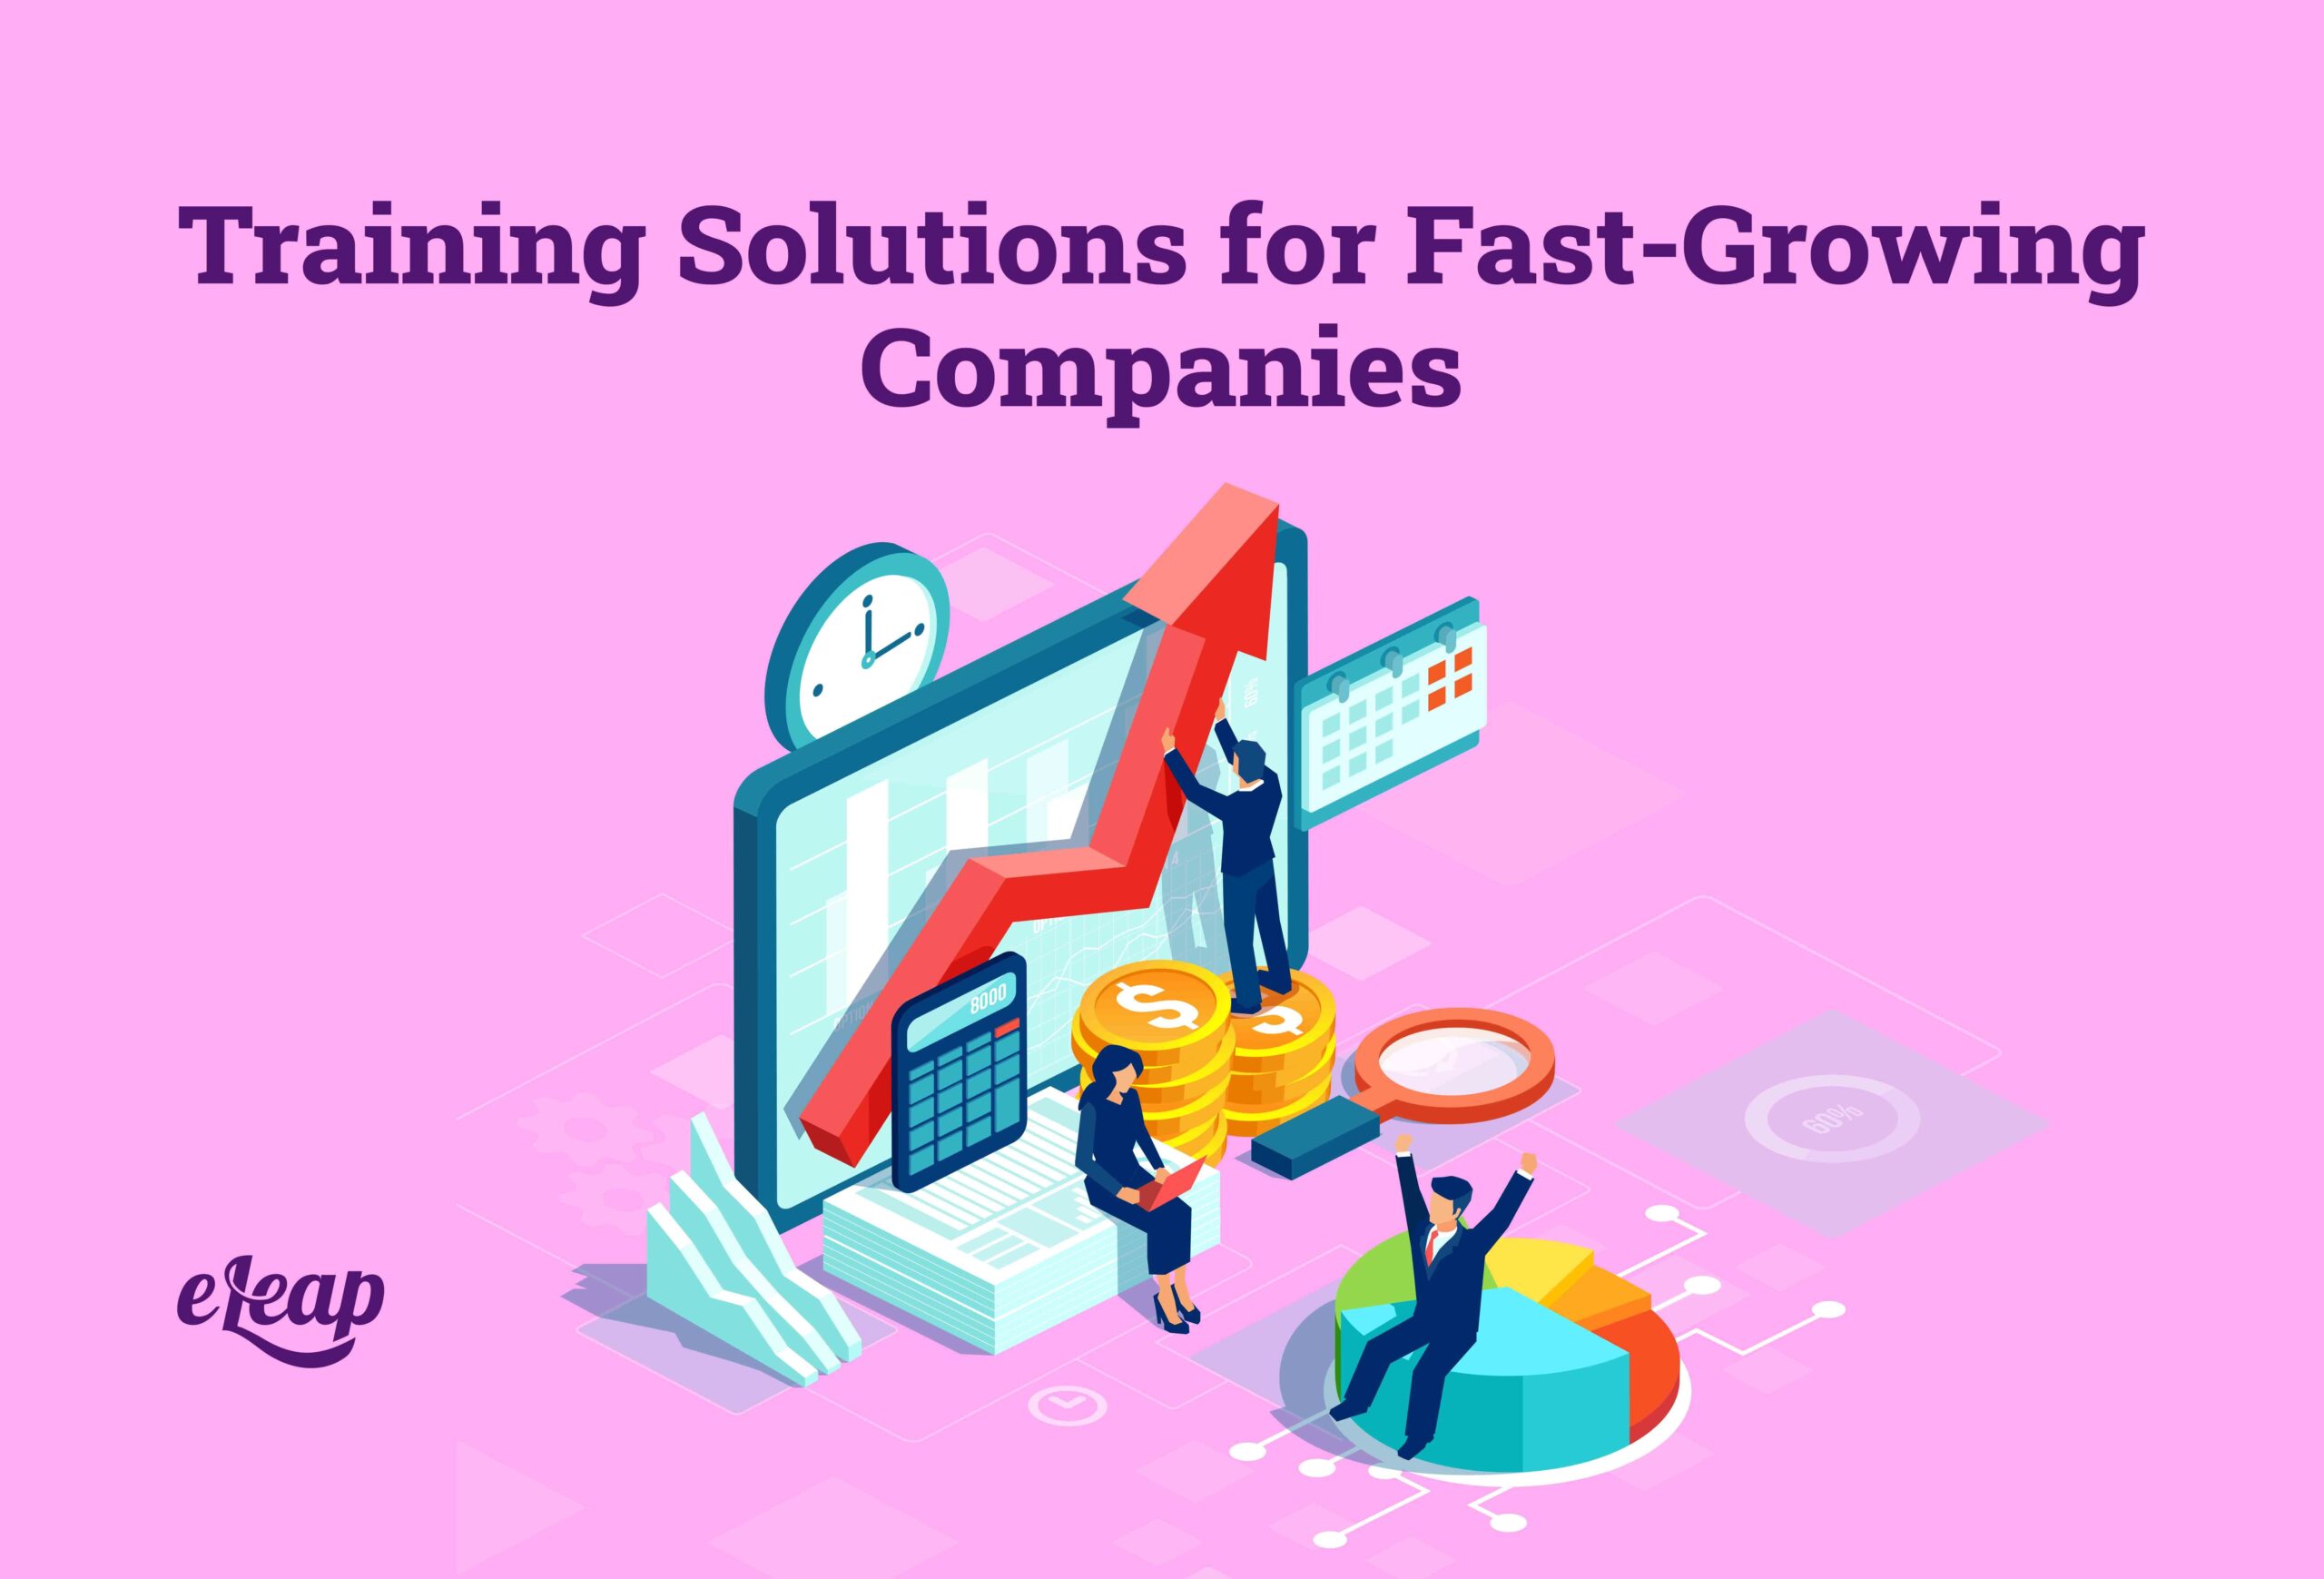 Training Solutions for Fast-Growing Companies